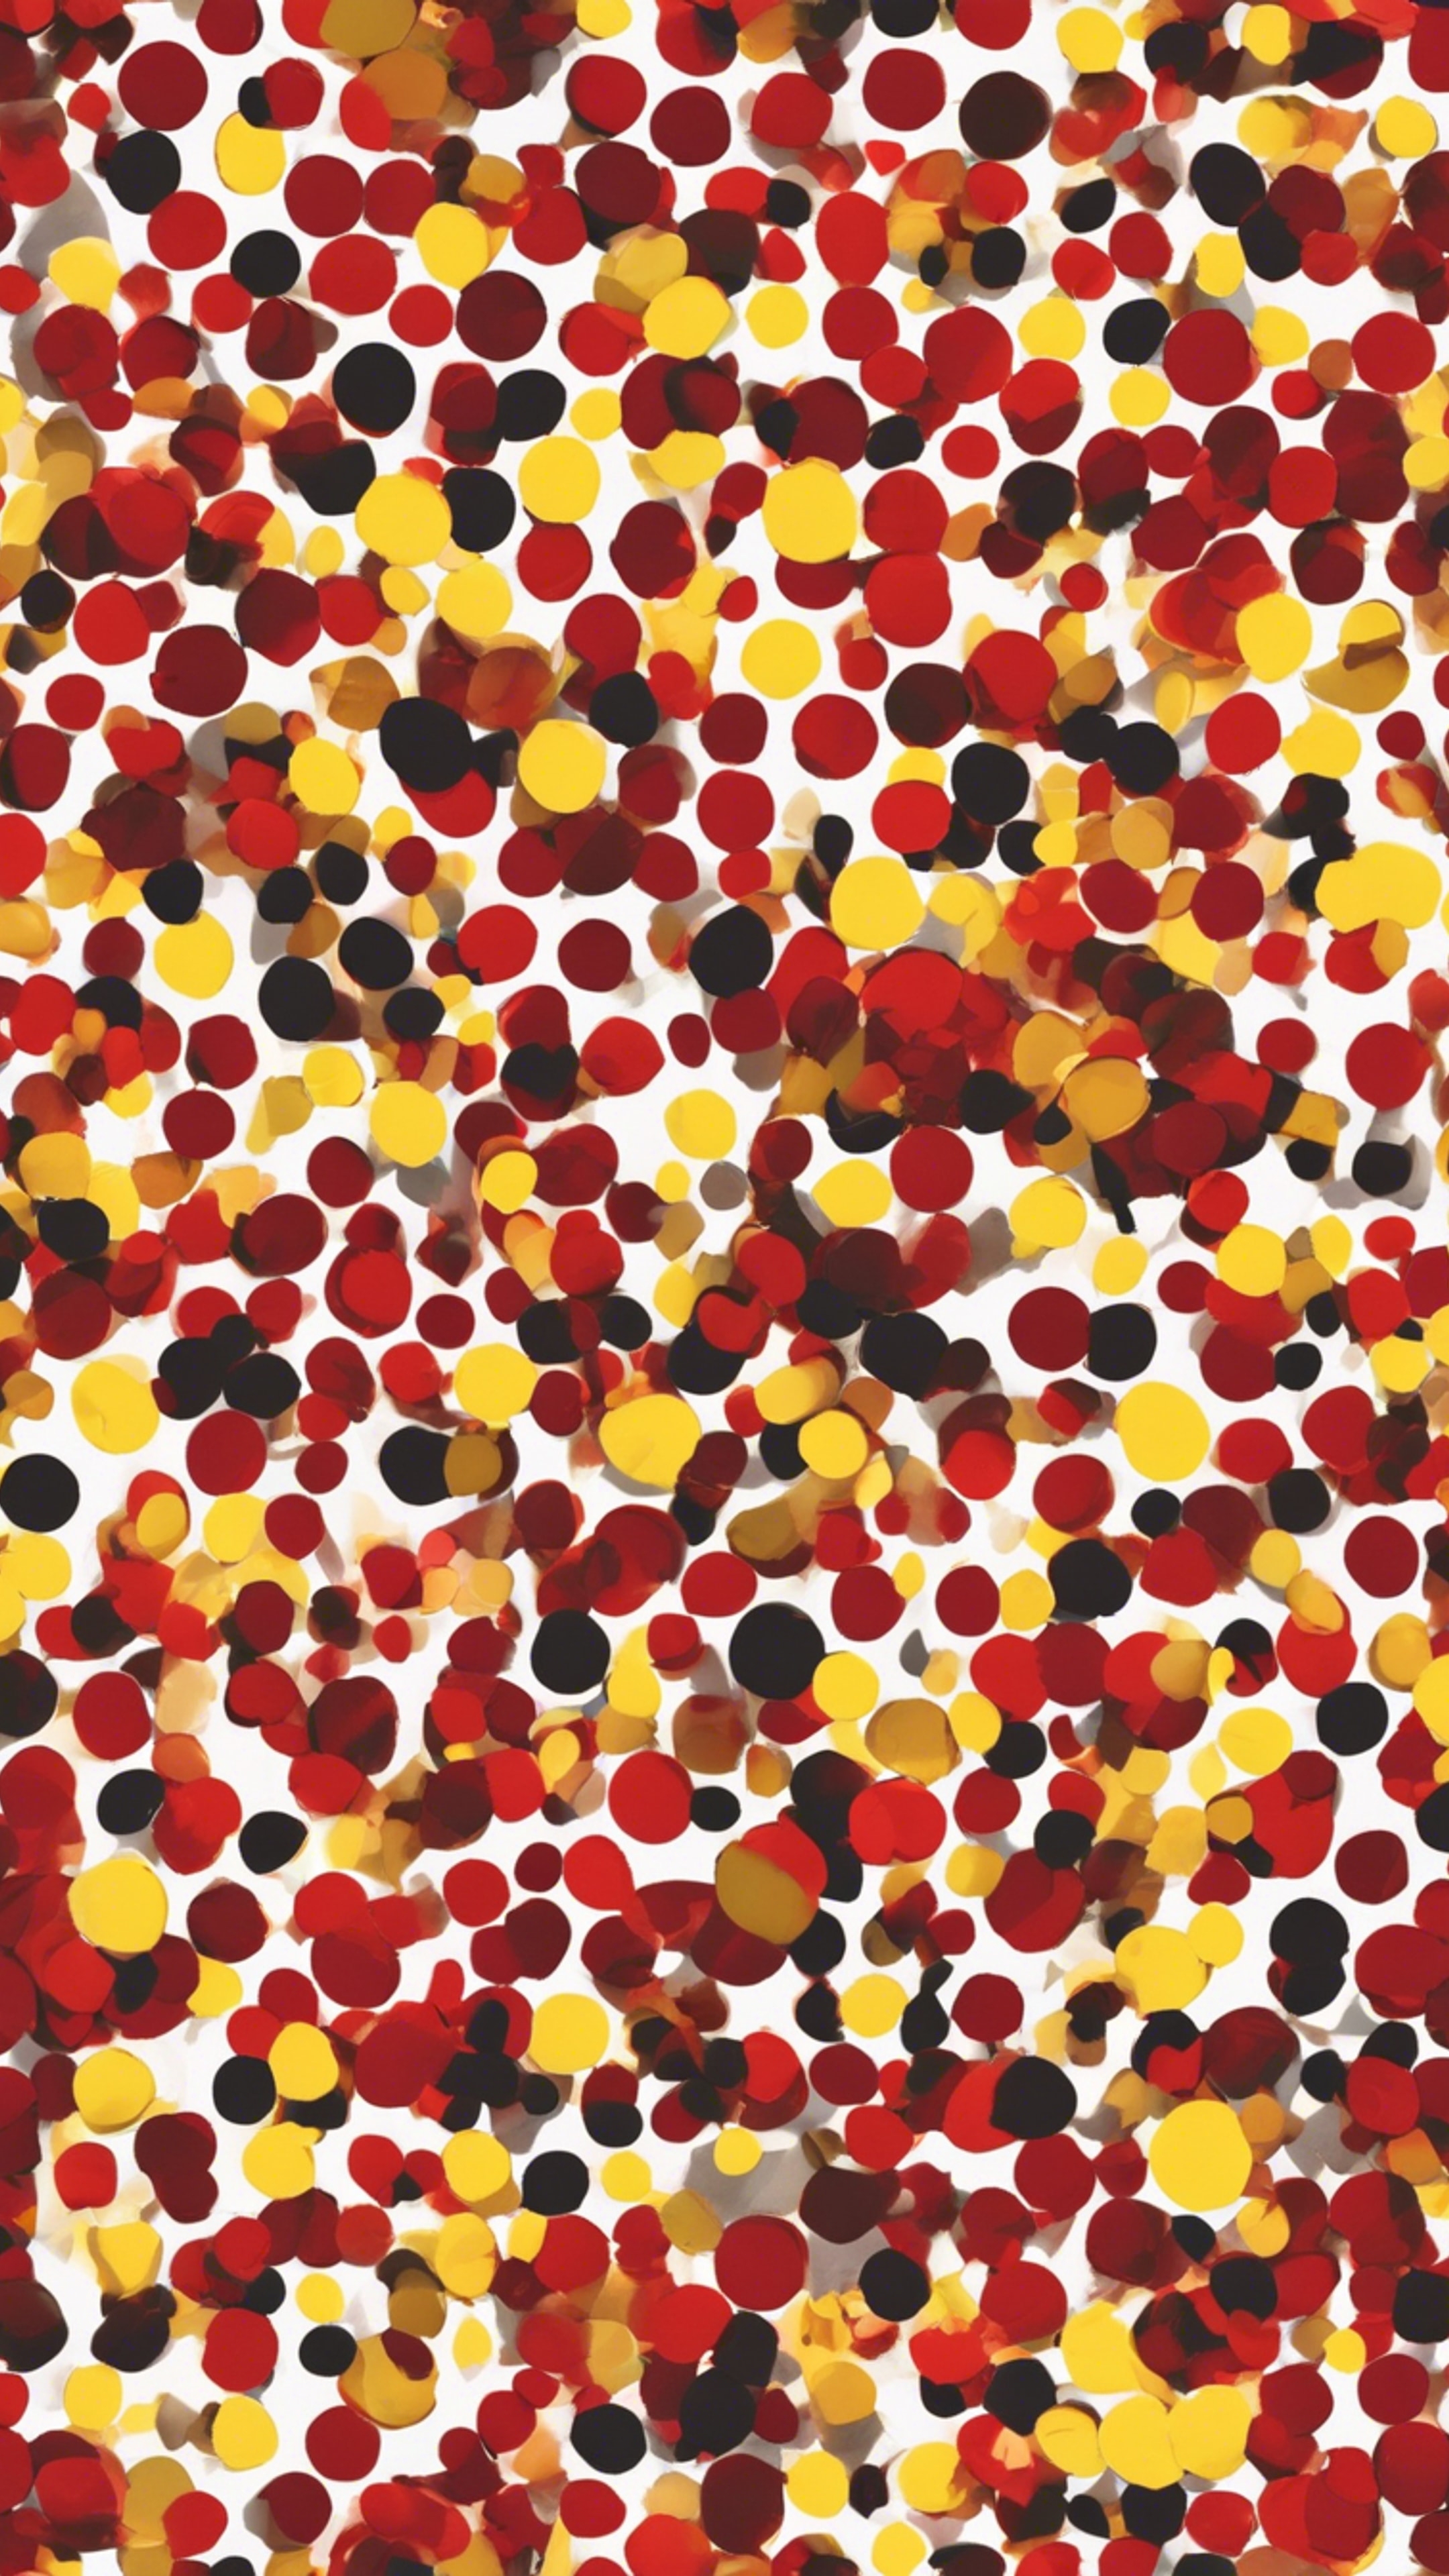 Scattered polka dots, small red ones and large yellow ones, in a seamless pattern. Ταπετσαρία[491989b84cbb438494fe]